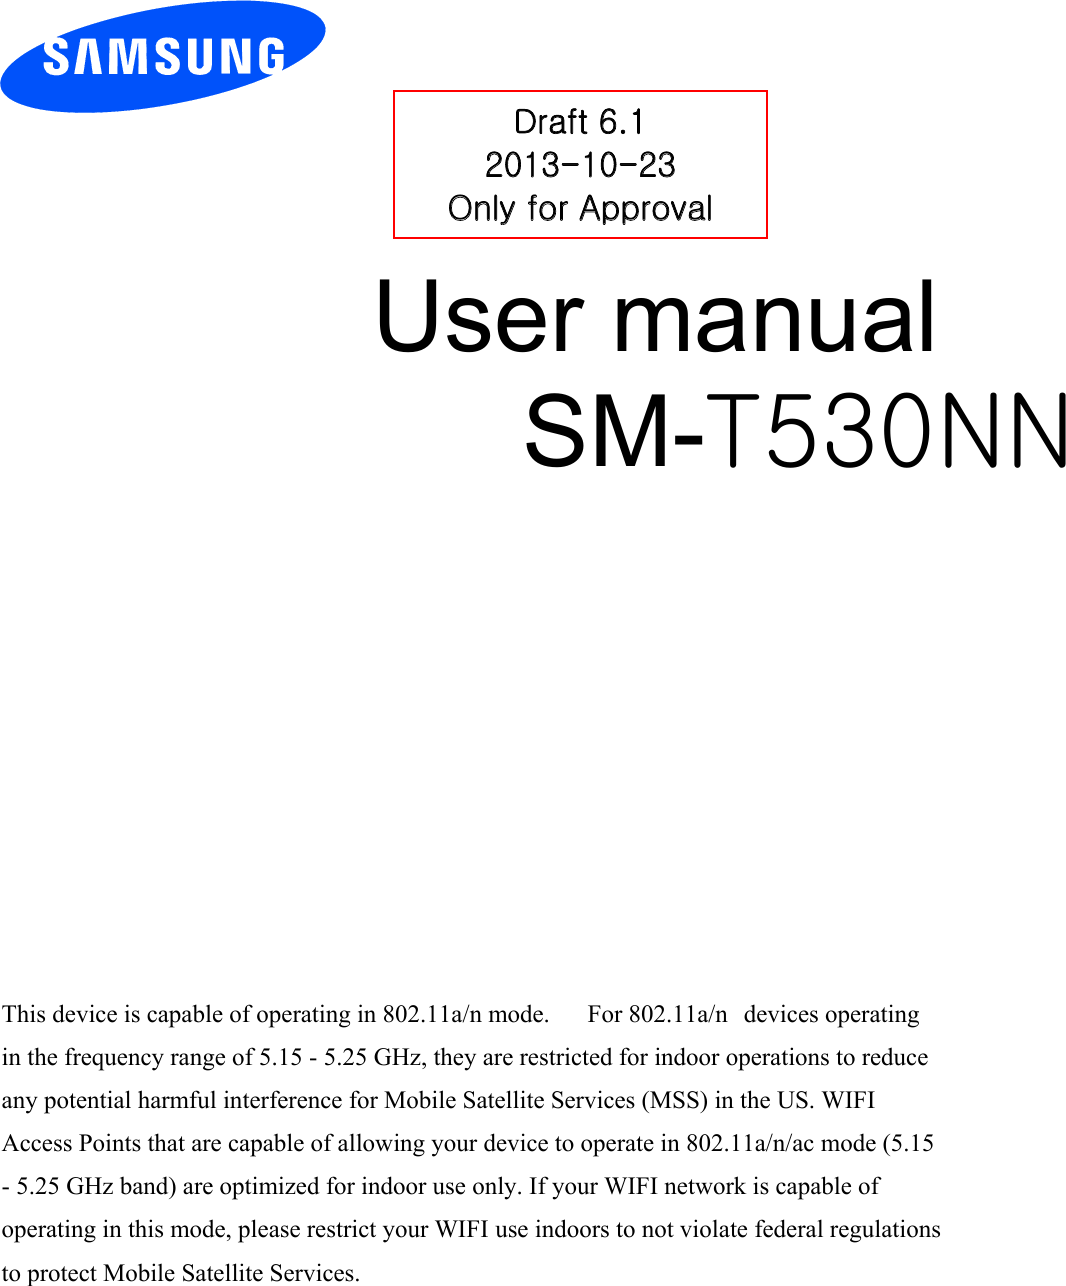 User manual SM-T530NN Draft 6.1 2013-10-23 Only for Approval This device is capable of operating in 802.11a/n mode.      For 802.11a/n devices operating in the frequency range of 5.15 - 5.25 GHz, they are restricted for indoor operations to reduce any potential harmful interference for Mobile Satellite Services (MSS) in the US. WIFI Access Points that are capable of allowing your device to operate in 802.11a/n/ac mode (5.15 - 5.25 GHz band) are optimized for indoor use only. If your WIFI network is capable of operating in this mode, please restrict your WIFI use indoors to not violate federal regulations to protect Mobile Satellite Services. 